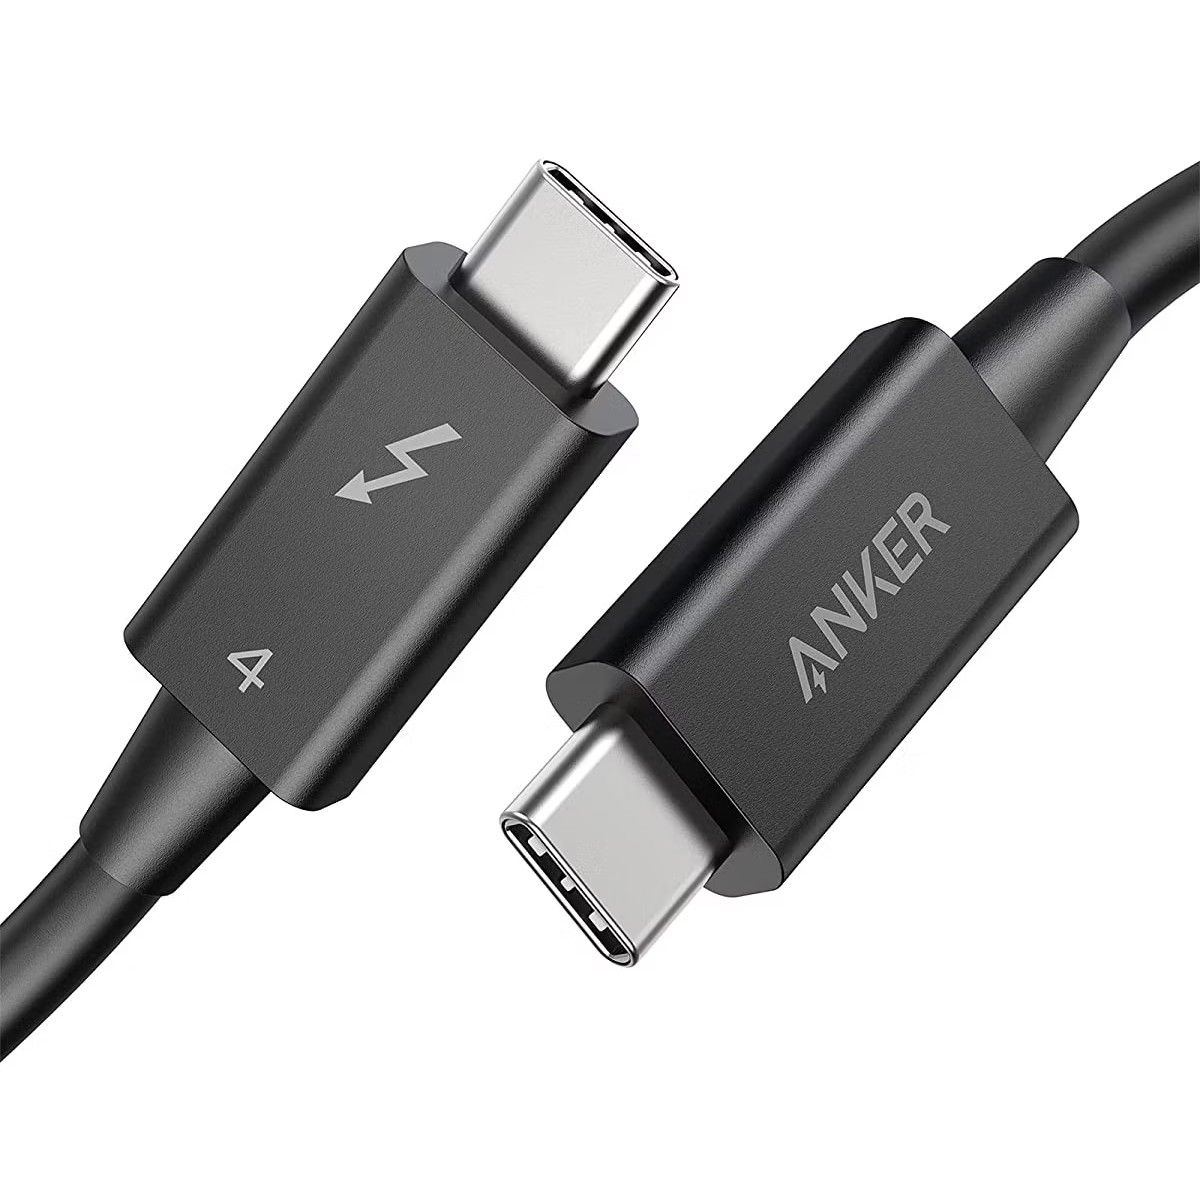 Anker USB-C to Lightning Audio Adapter Review